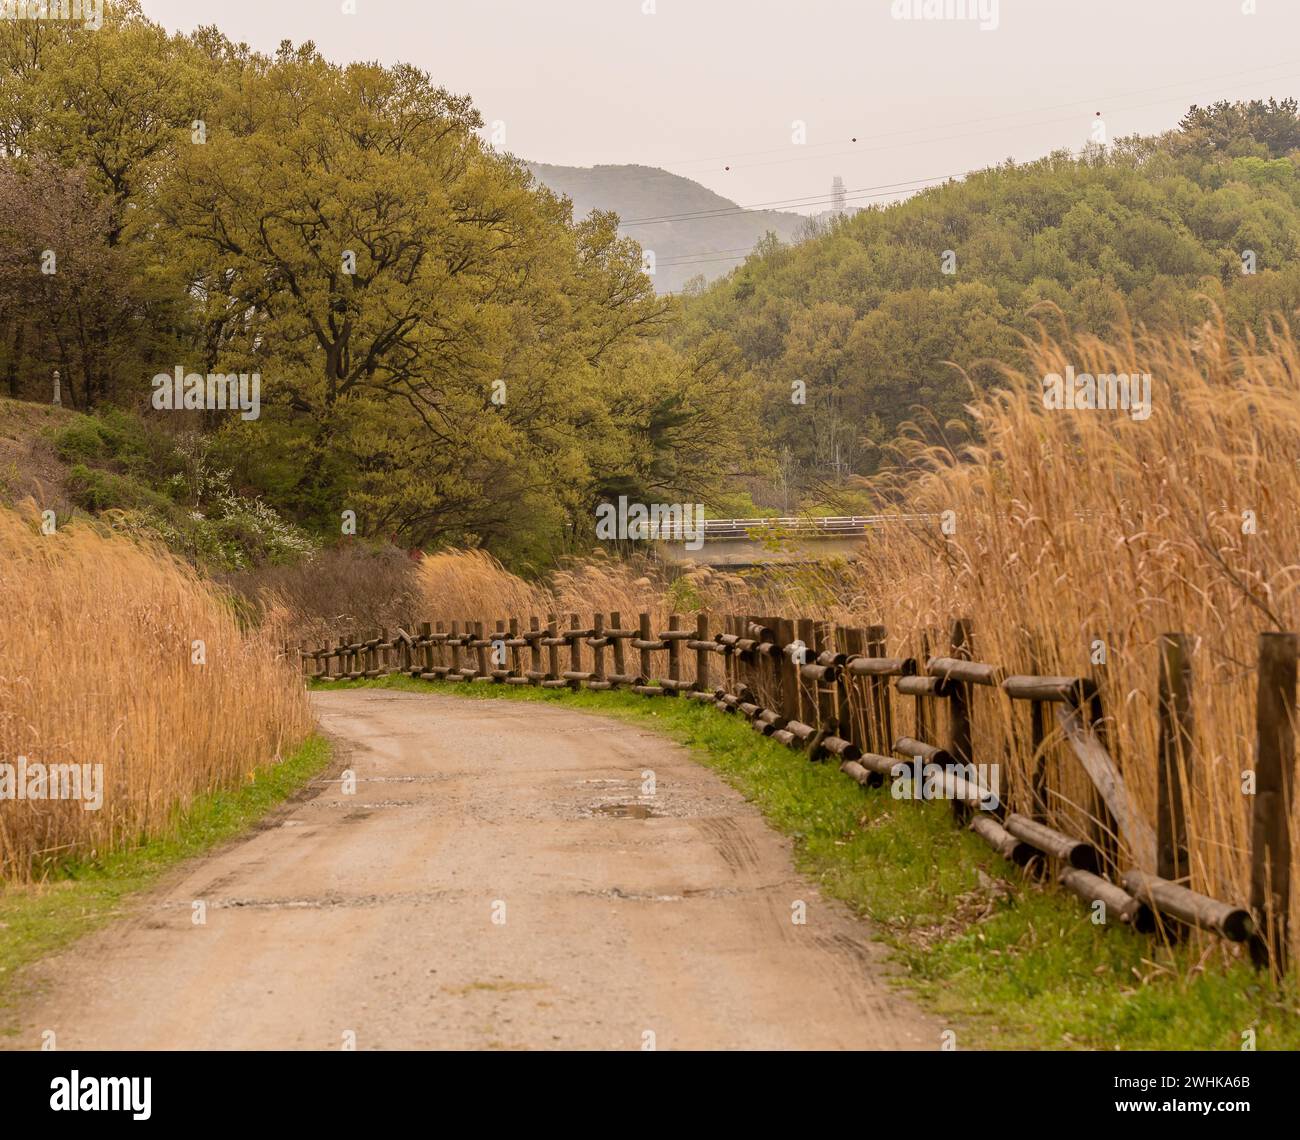 Country road with a wood rail fence leading to a wooded area with lush green trees with golden reeds in foreground Stock Photo